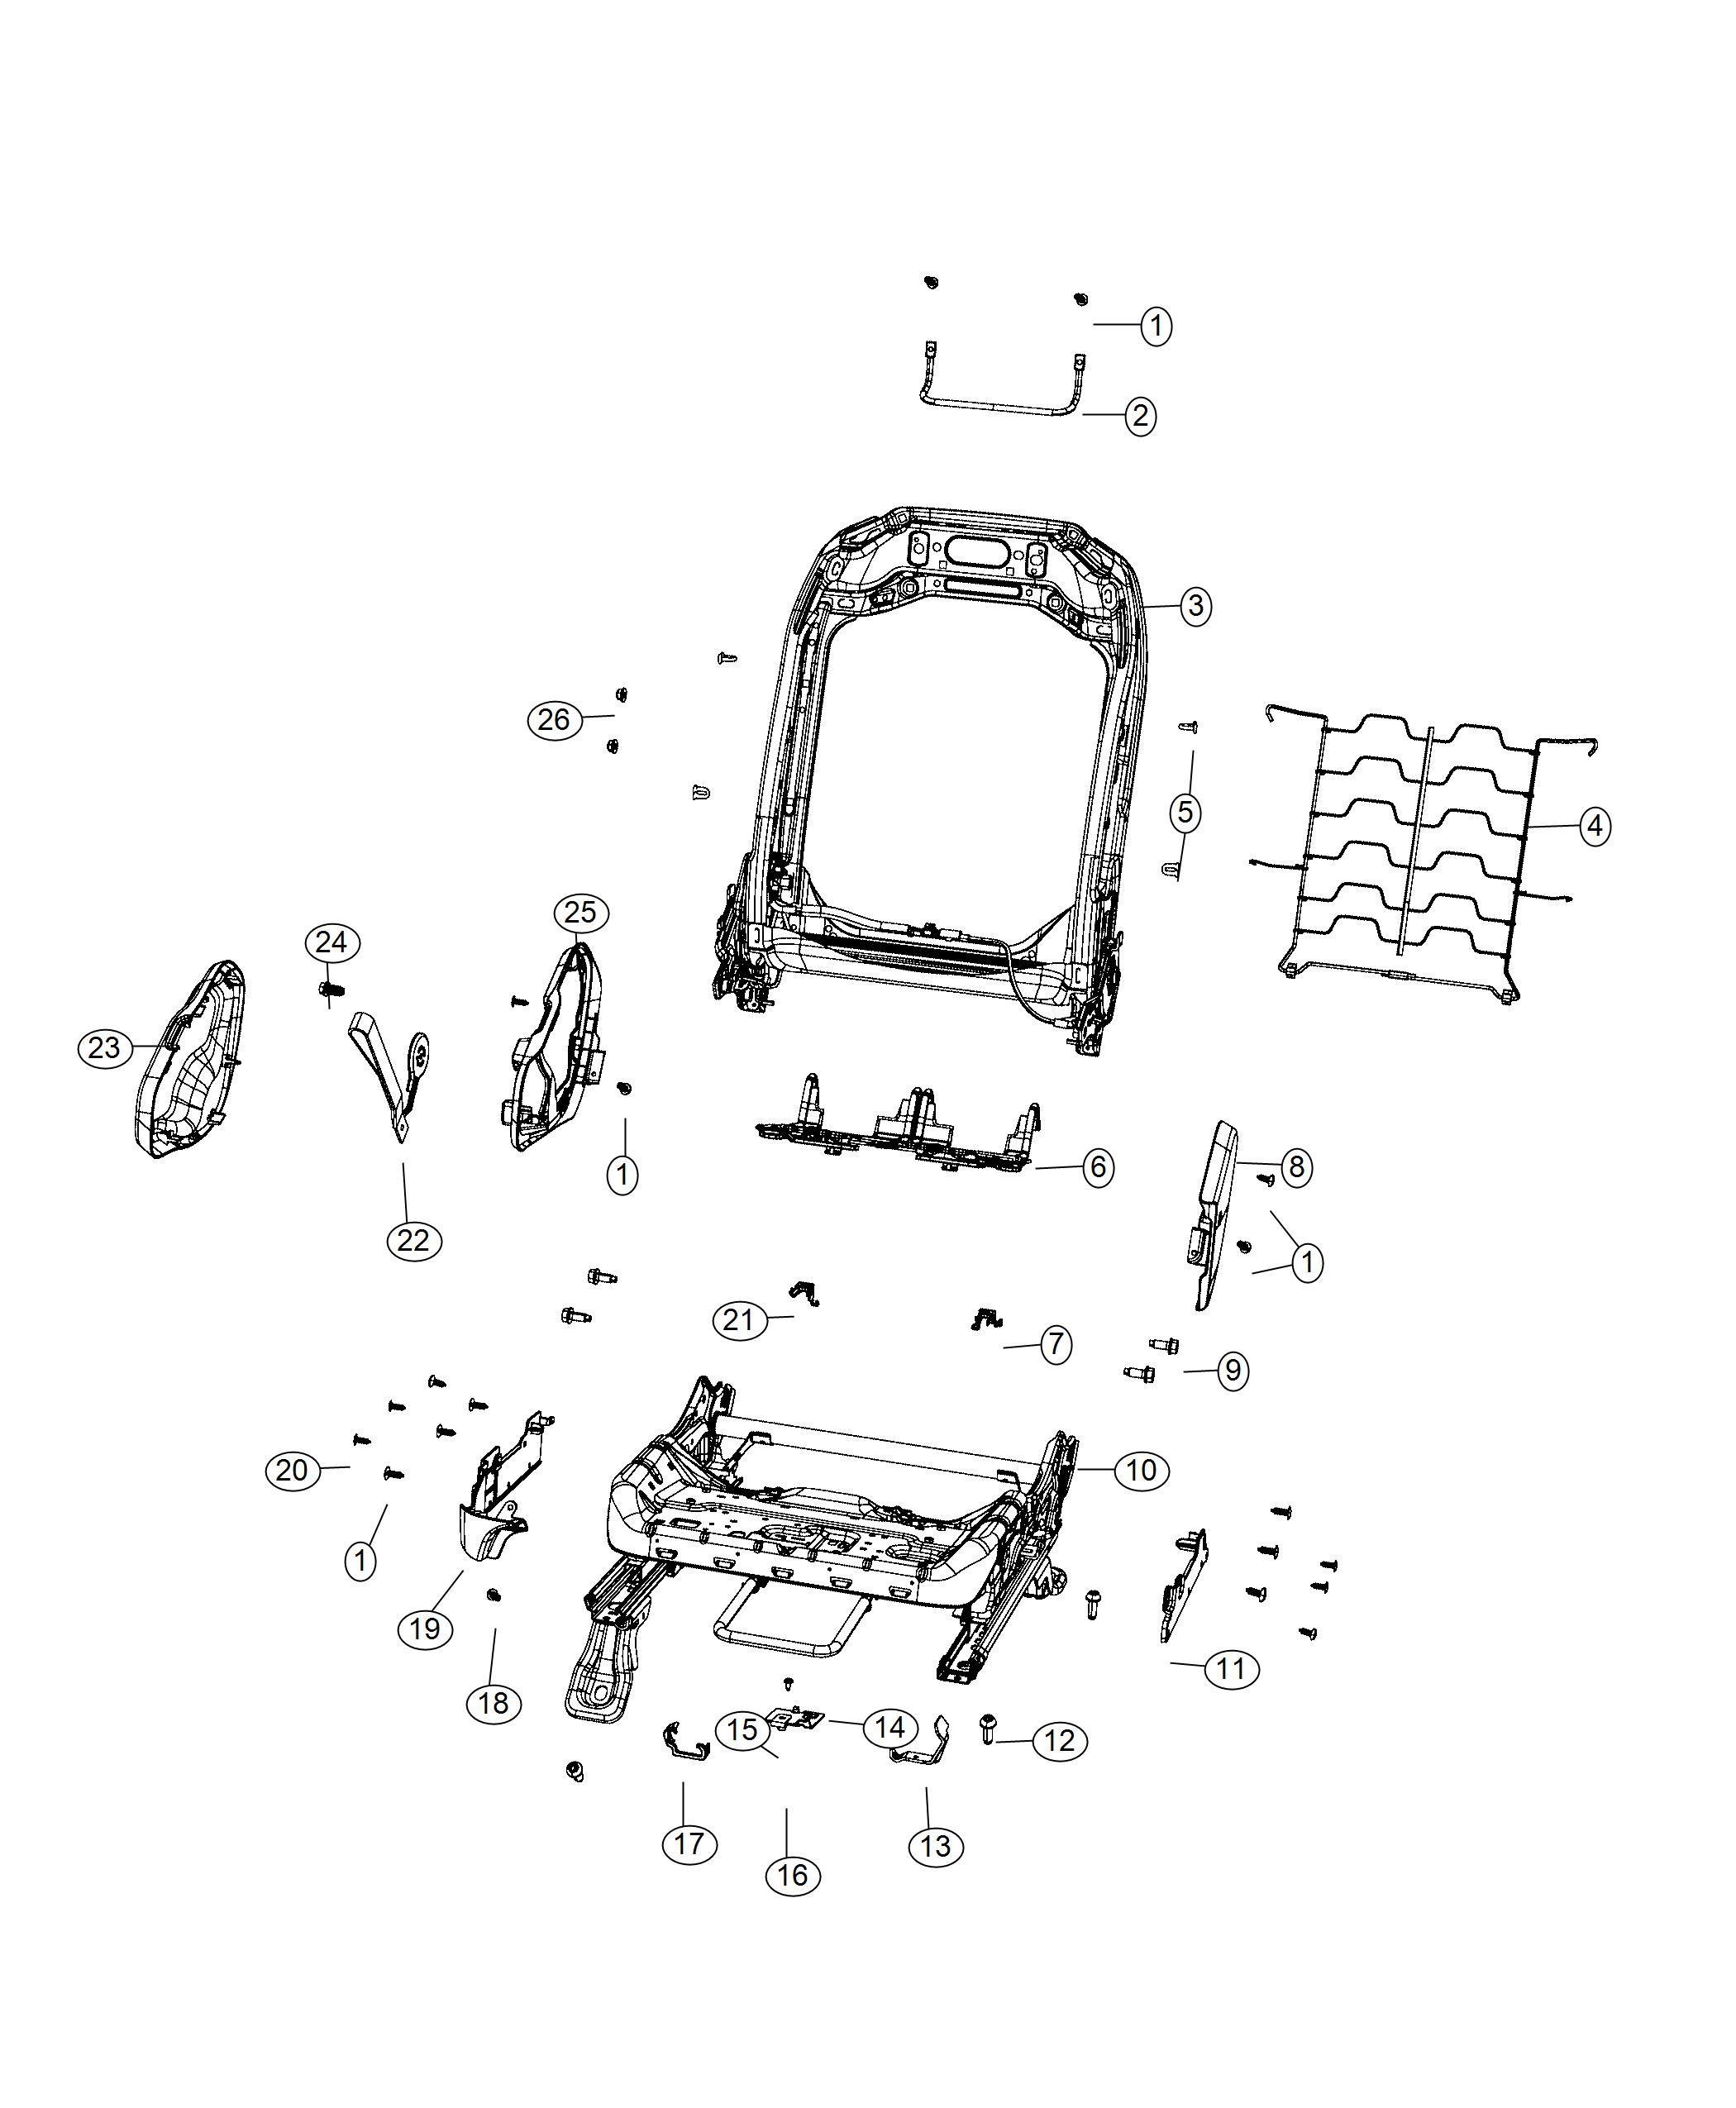 Adjusters, Recliners, Shields and Risers - Passenger Seat - 74 Body. Diagram